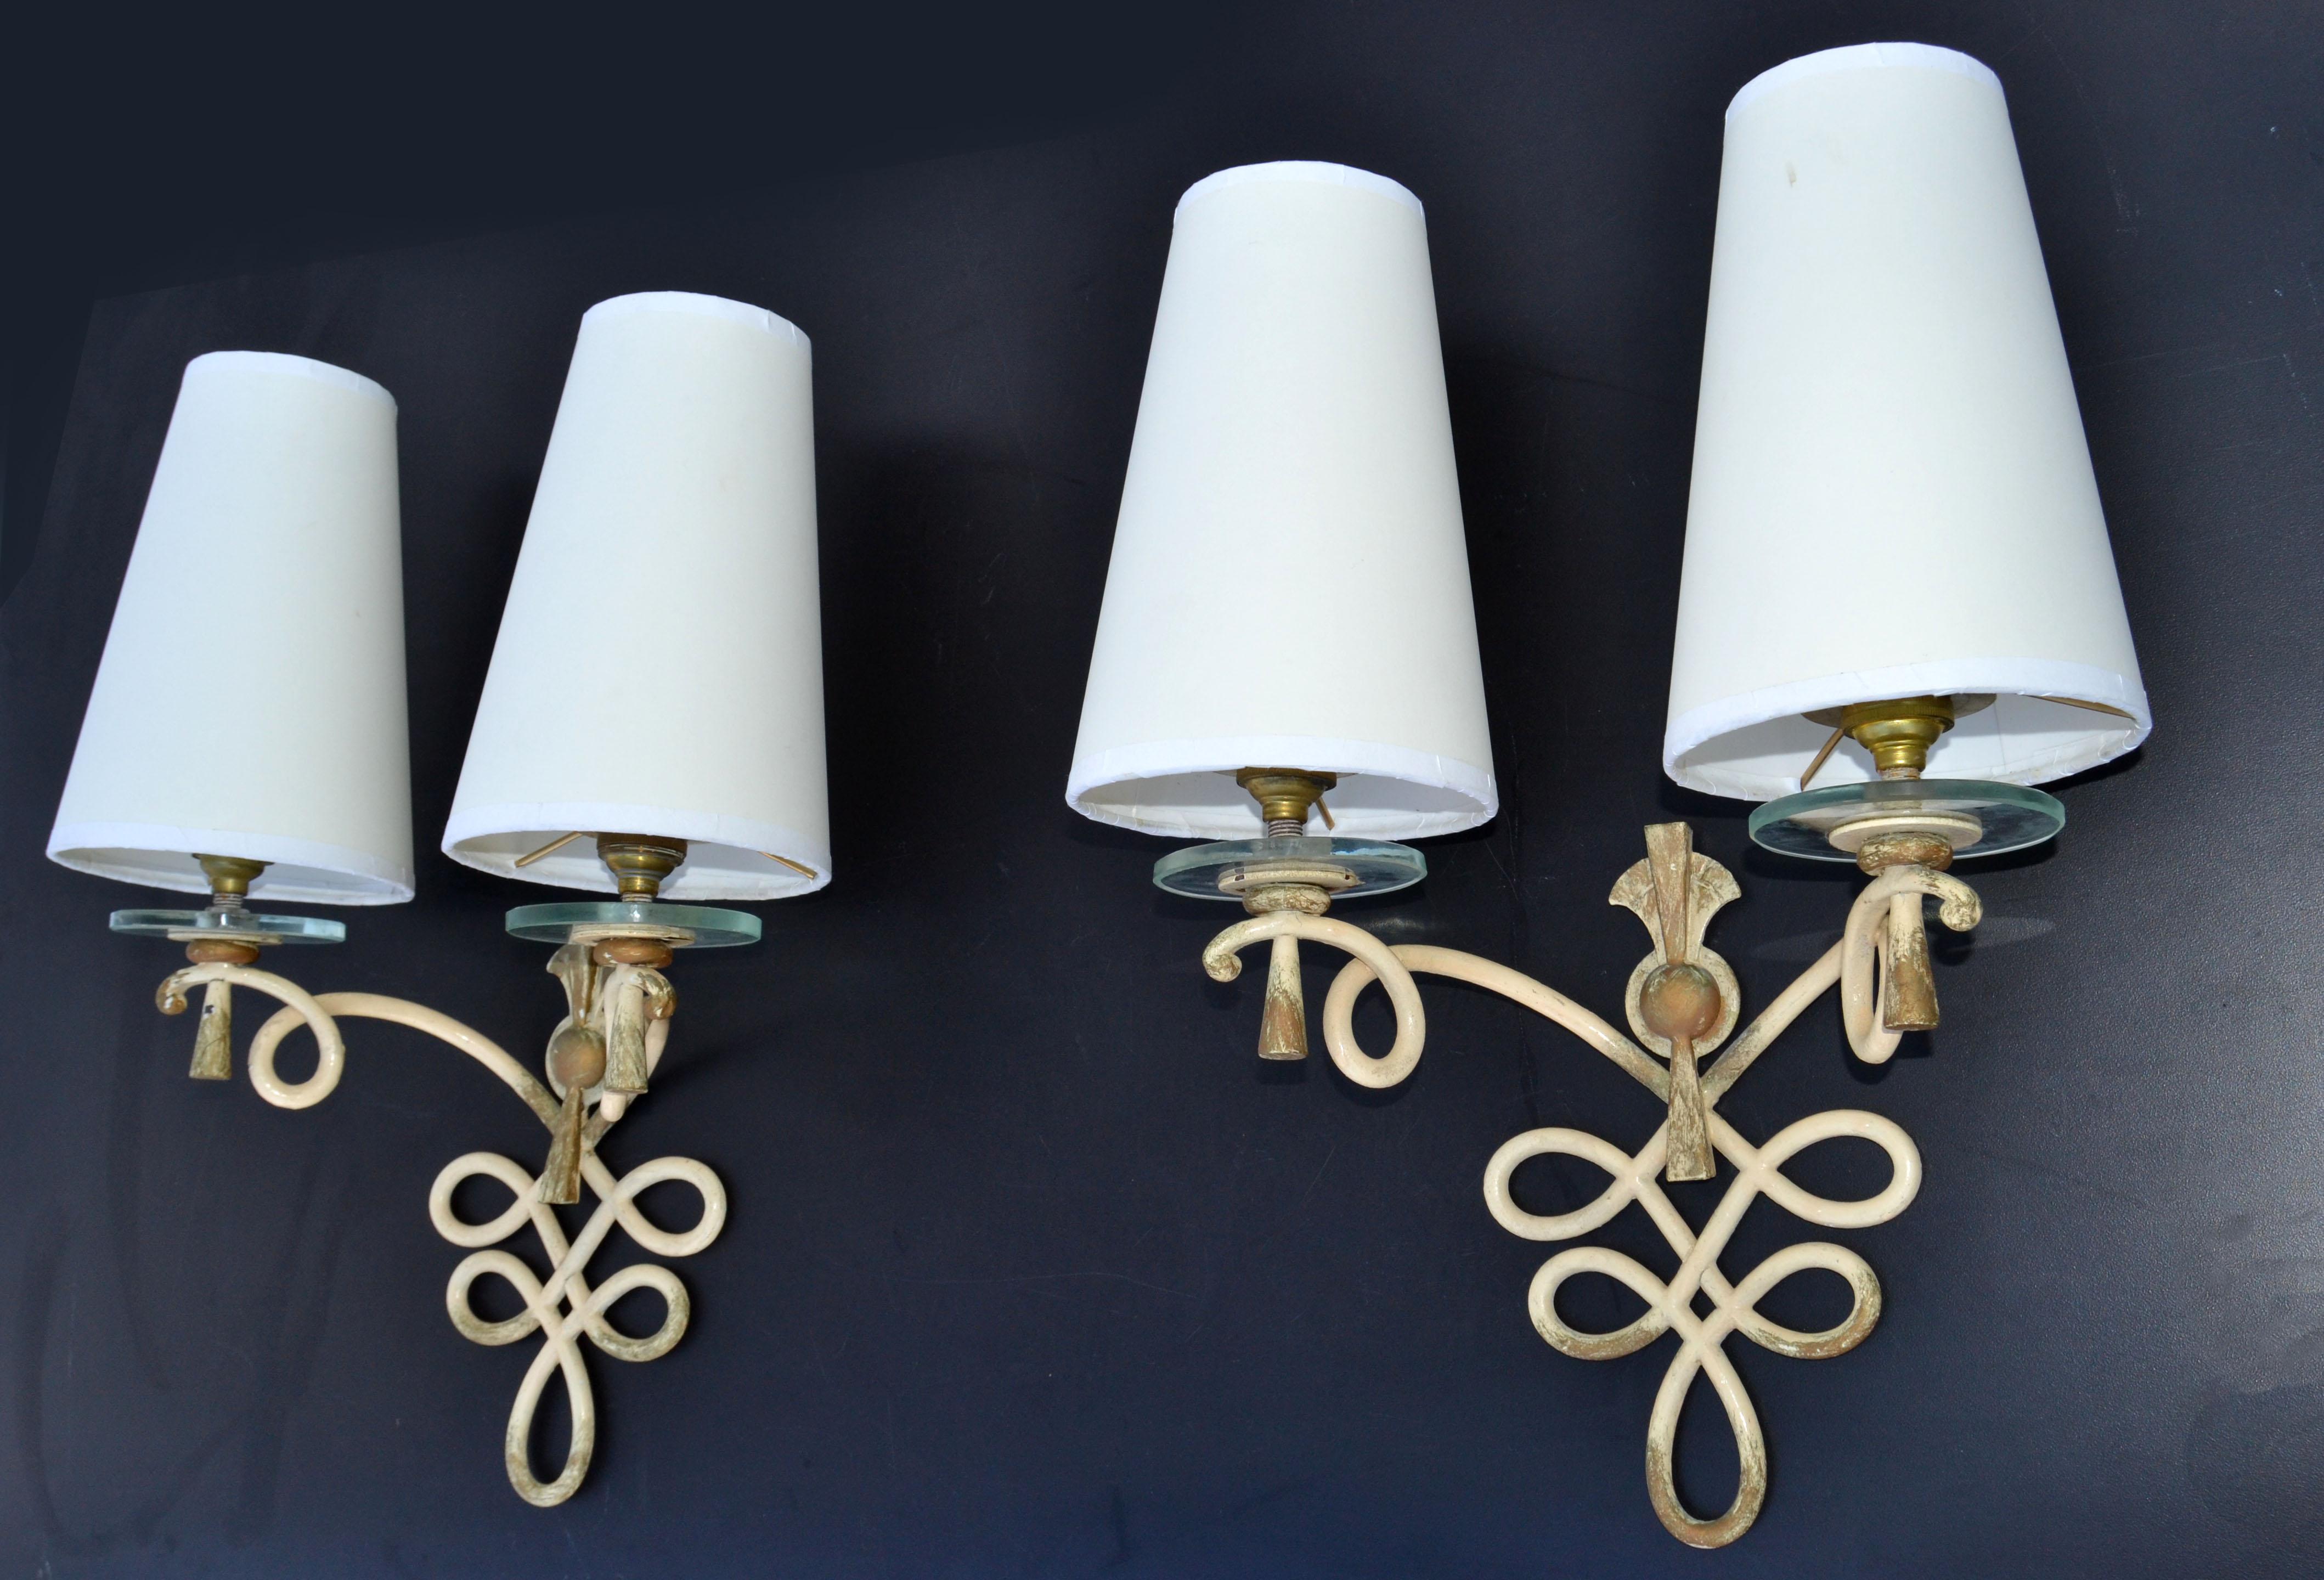 French Wrought Iron & Round Glass Sconces Cone Shades, Wall Lights Art Deco 1940 For Sale 2